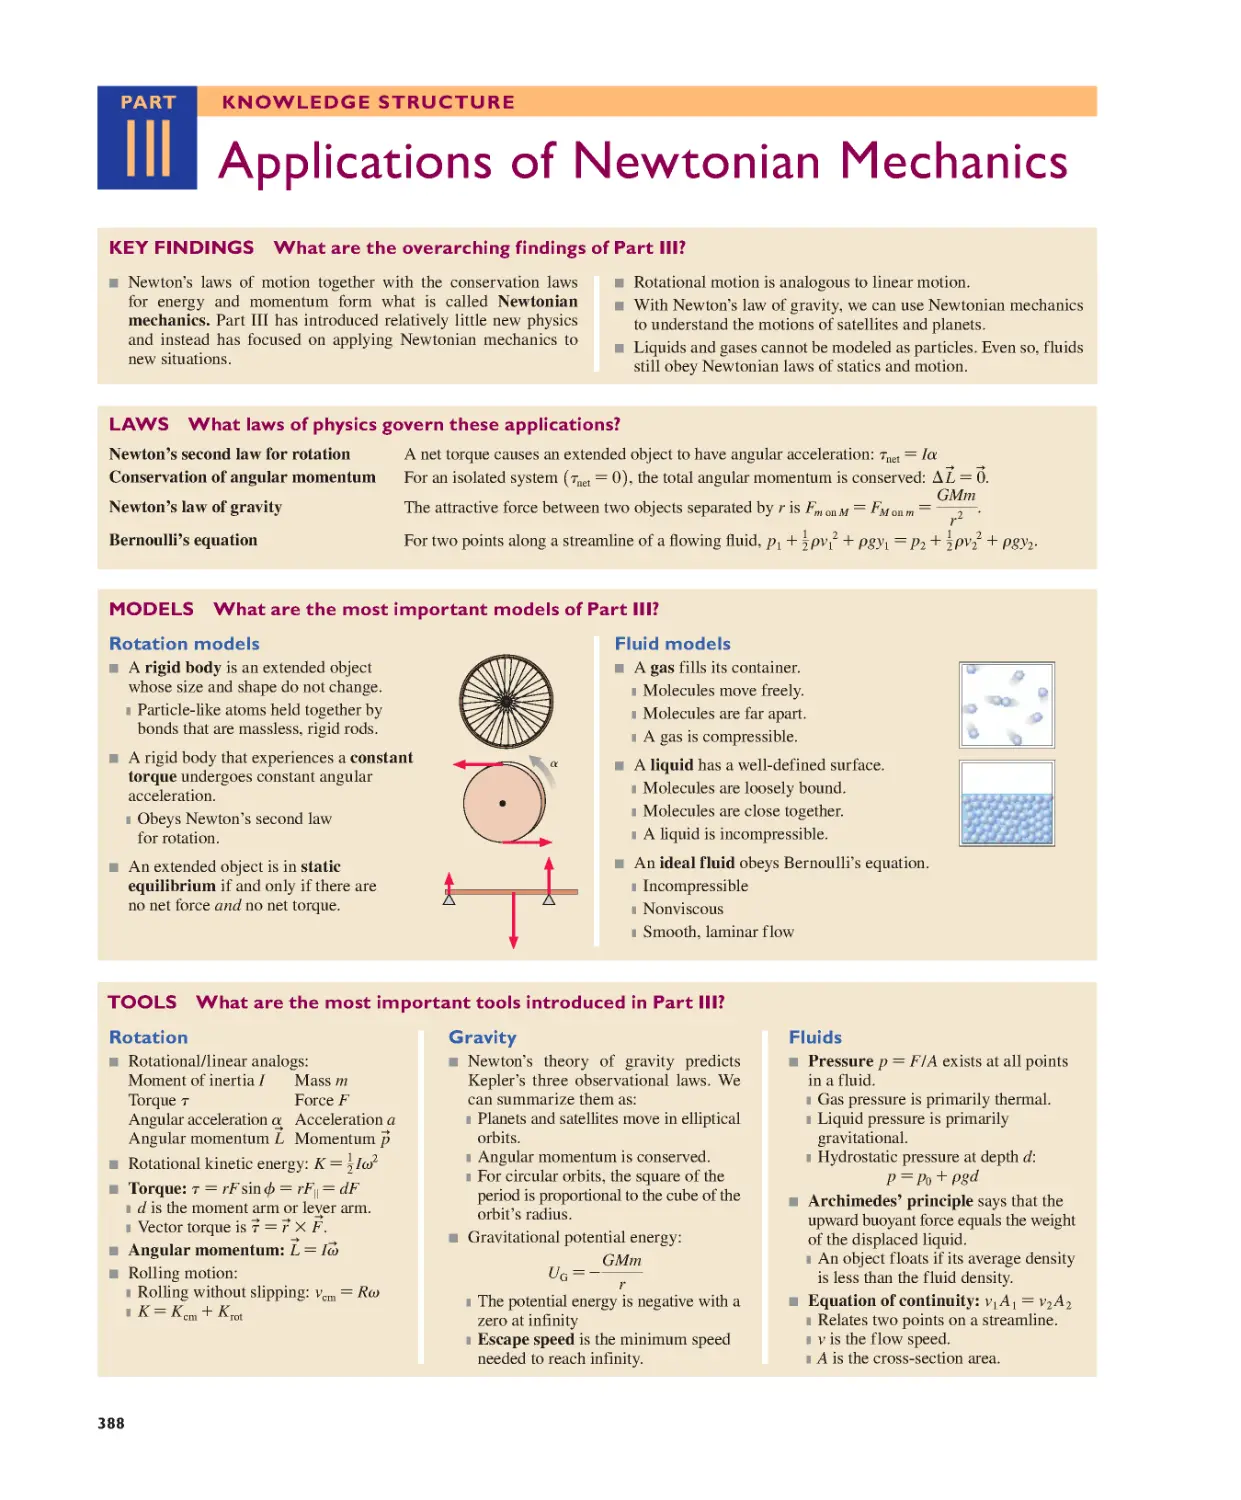 Part III: Knowledge Structure: Applications of Newtonian Mechanics